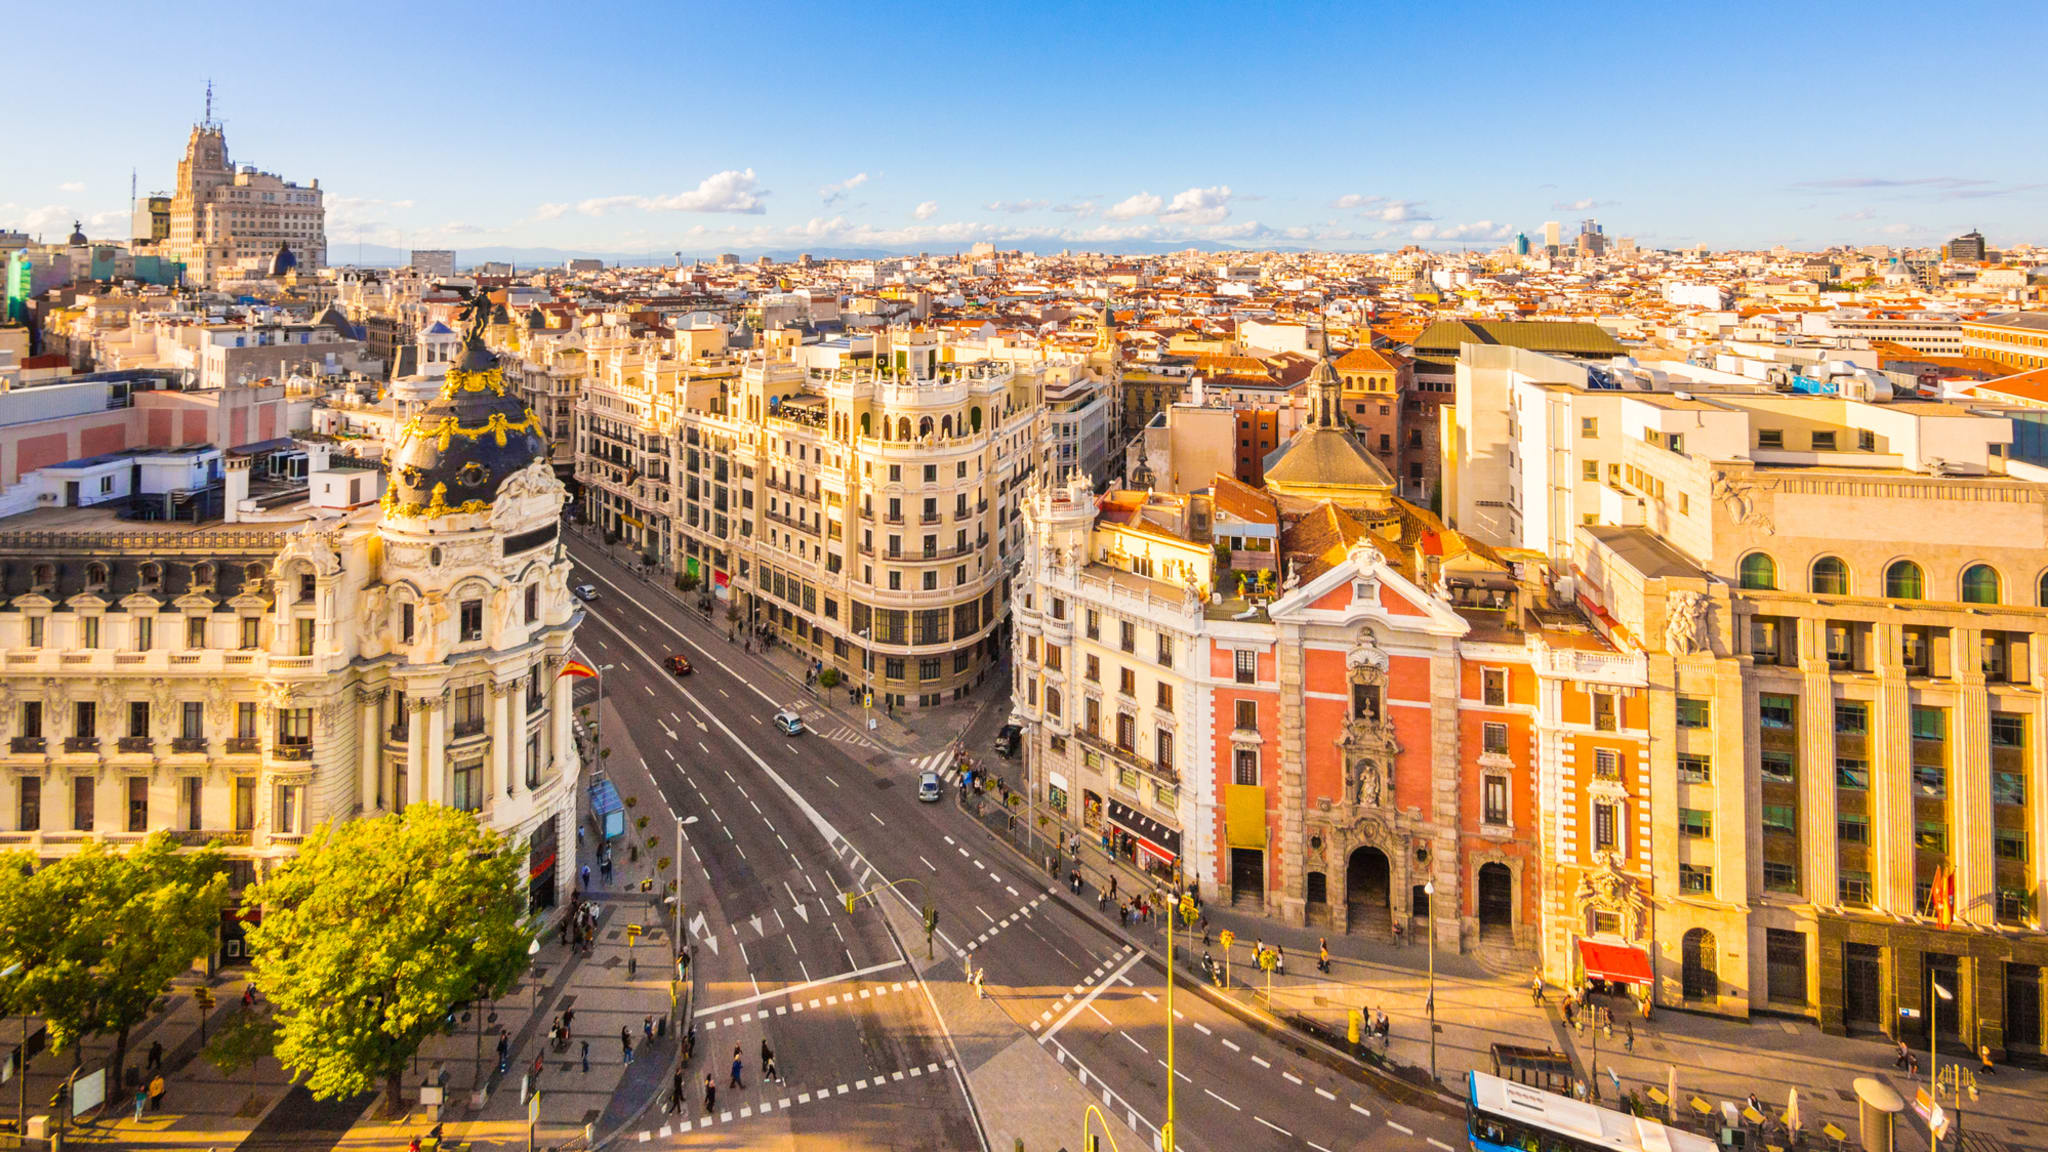 Calle de Alcalá in Madrid, Spanien © holgs/iStock / Getty Images Plus via Getty Images